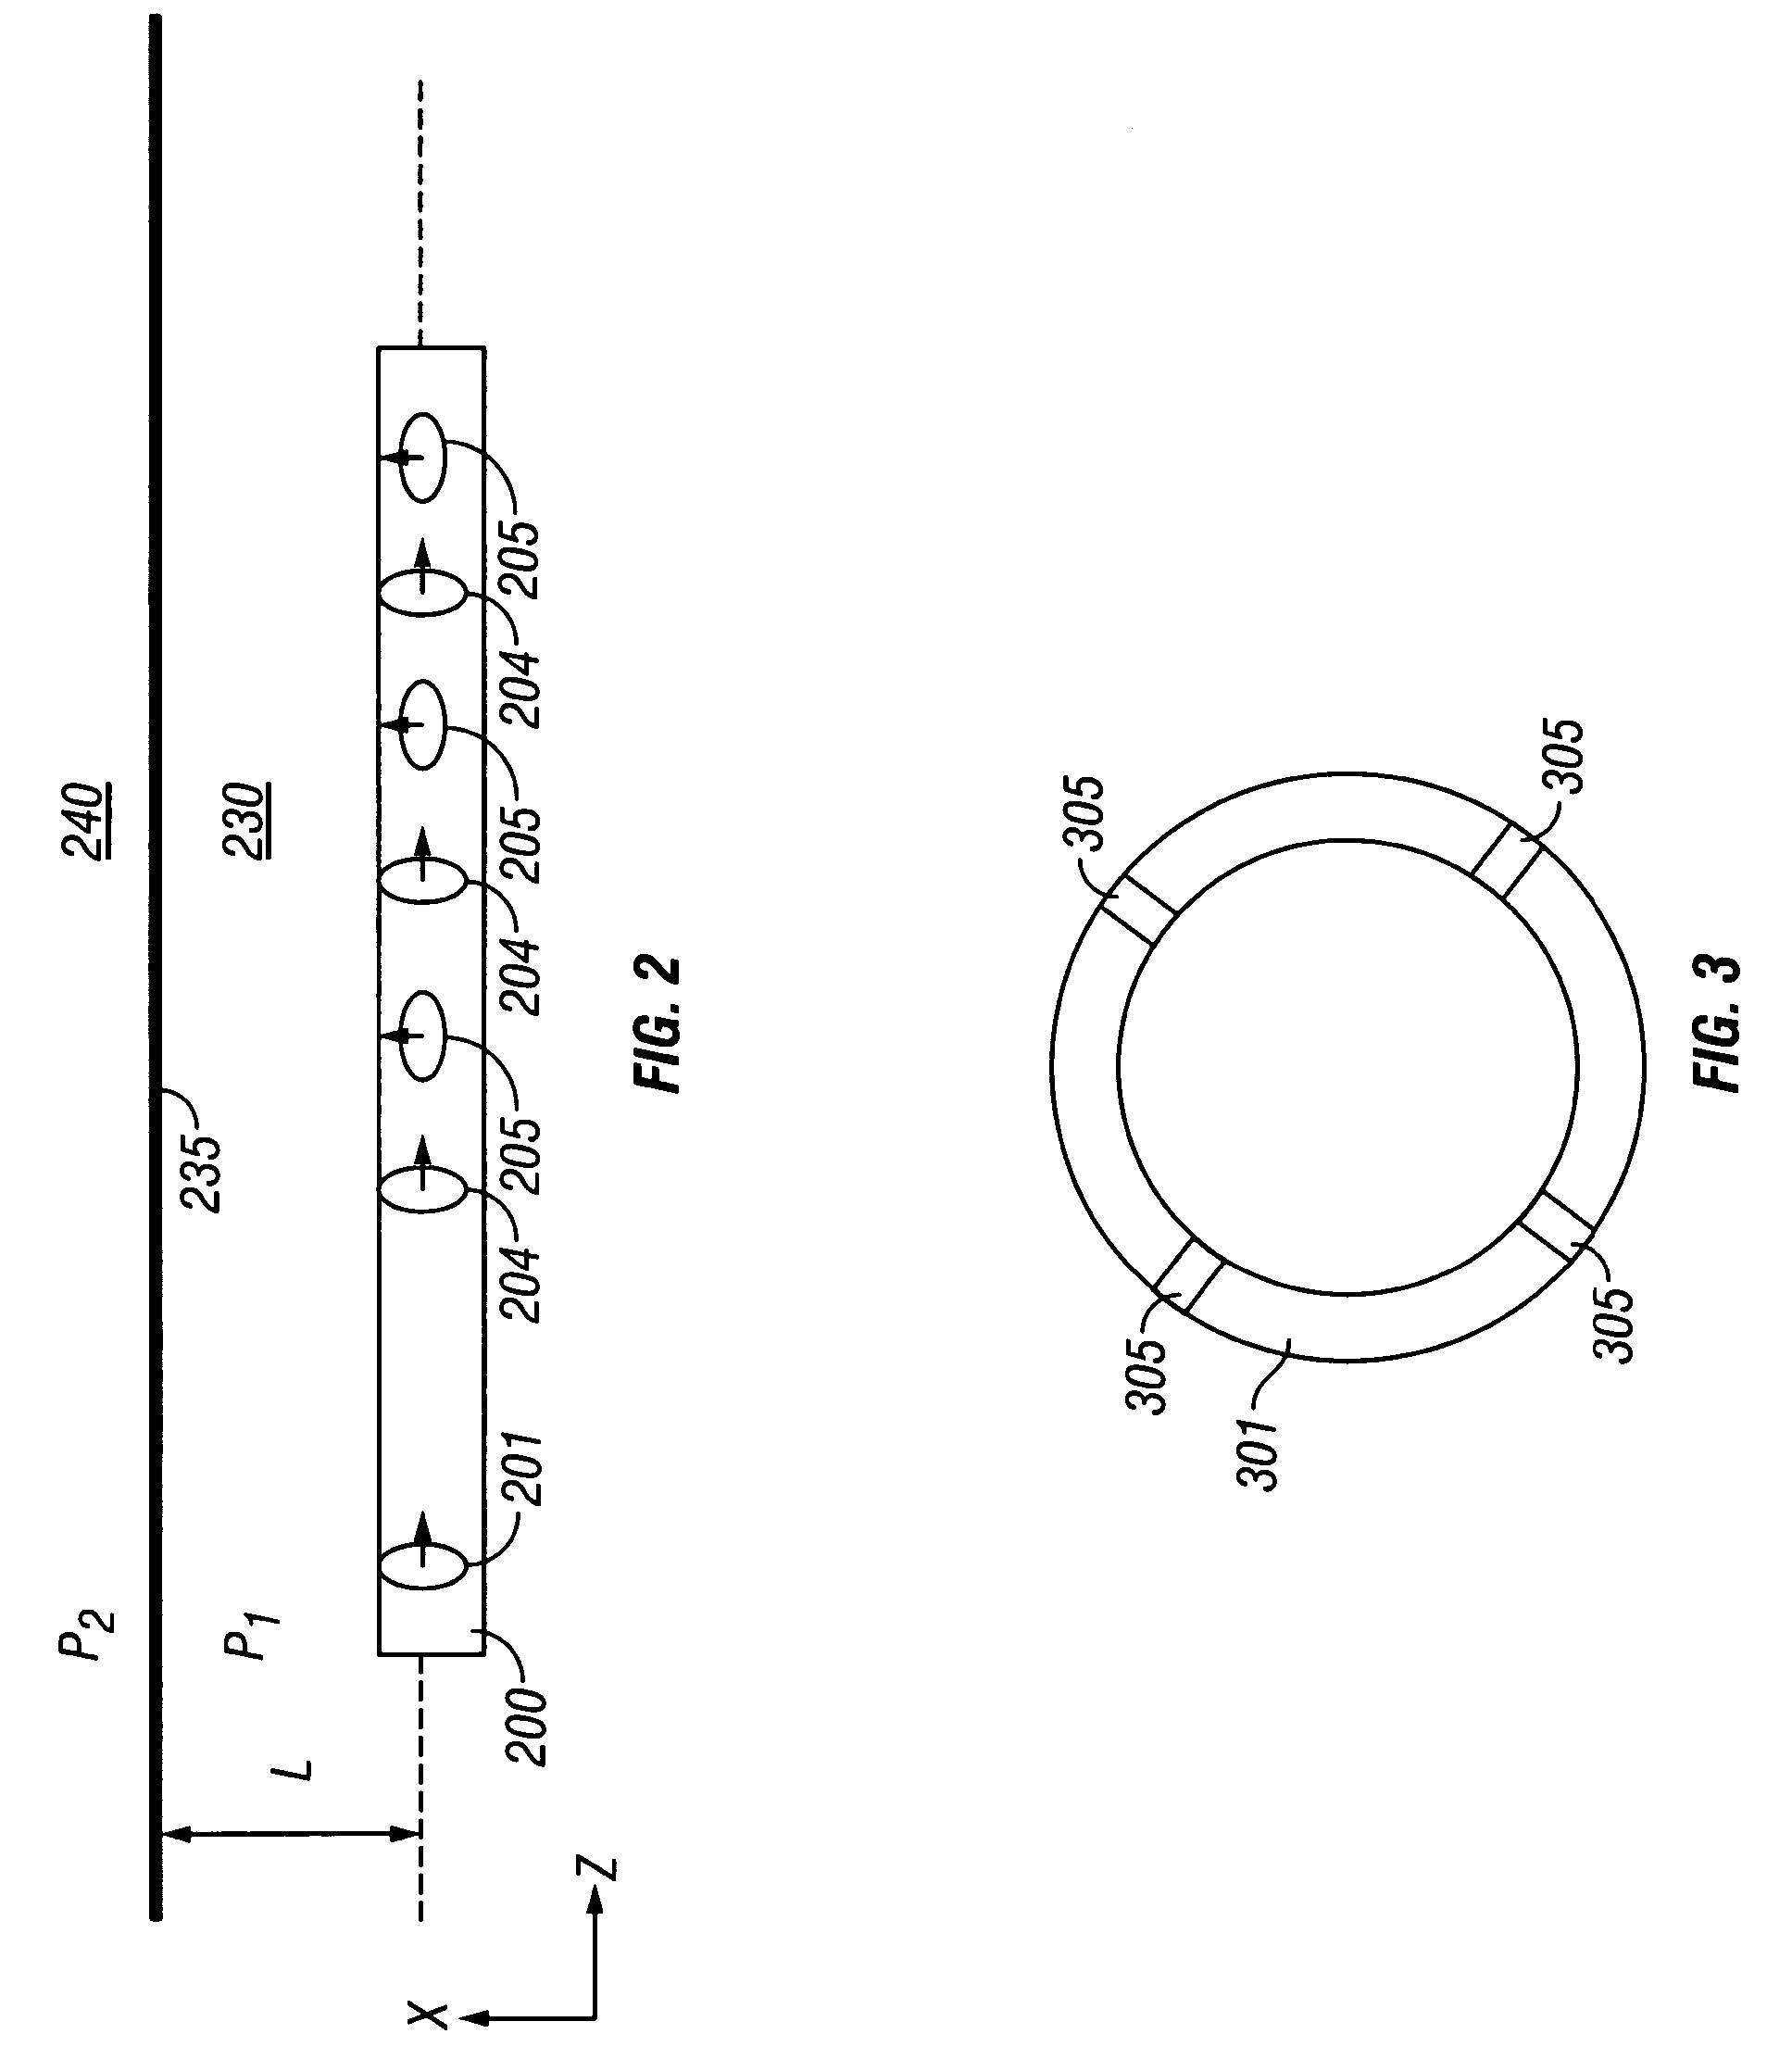 Method of eliminating conductive drill parasitic influence on the measurements of transient electromagnetic components in MWD tools